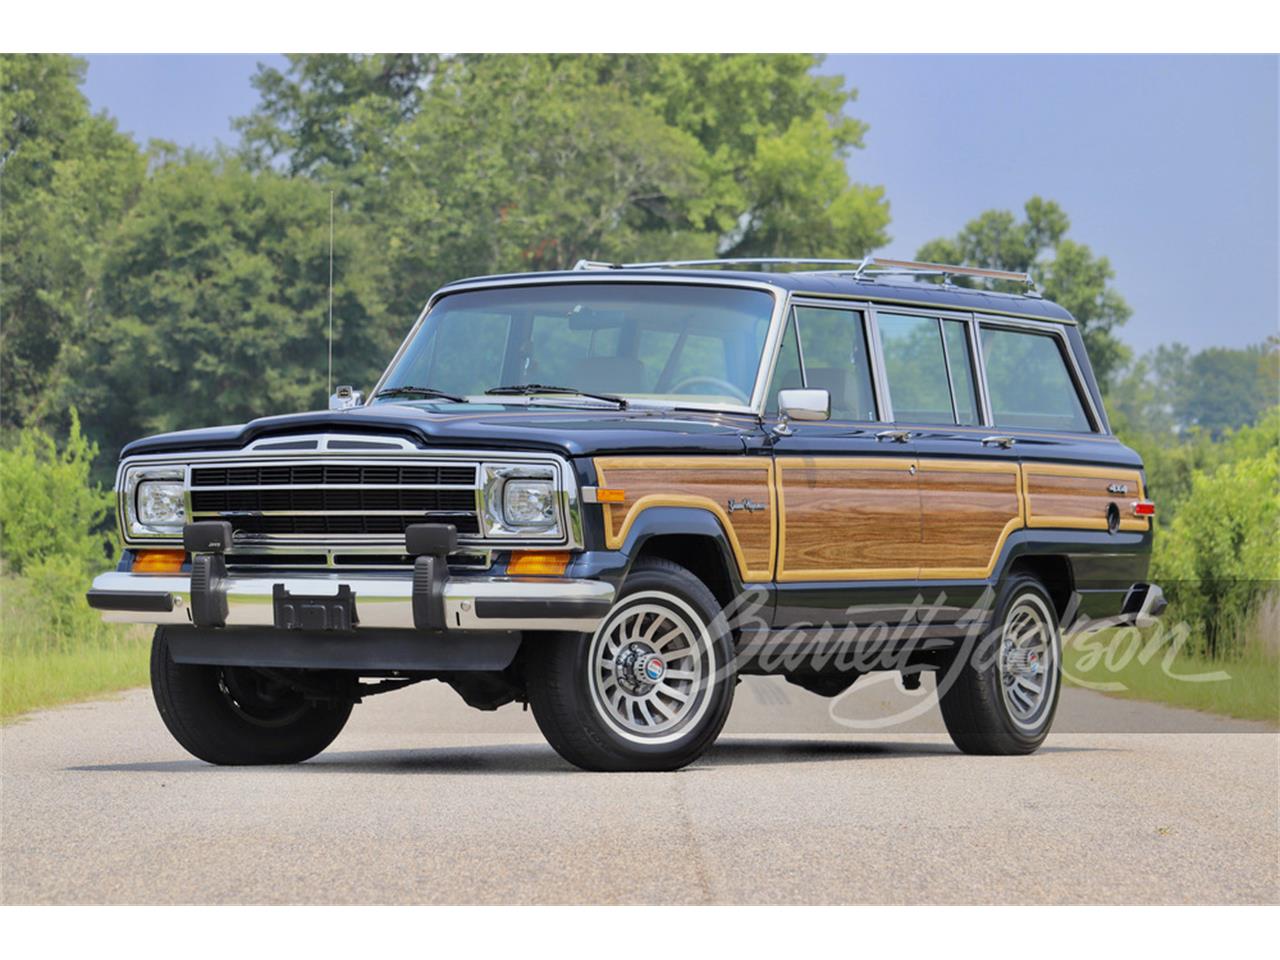 For Sale at Auction: 1991 Jeep Grand Wagoneer in Scottsdale, Arizona for sale in Scottsdale, AZ